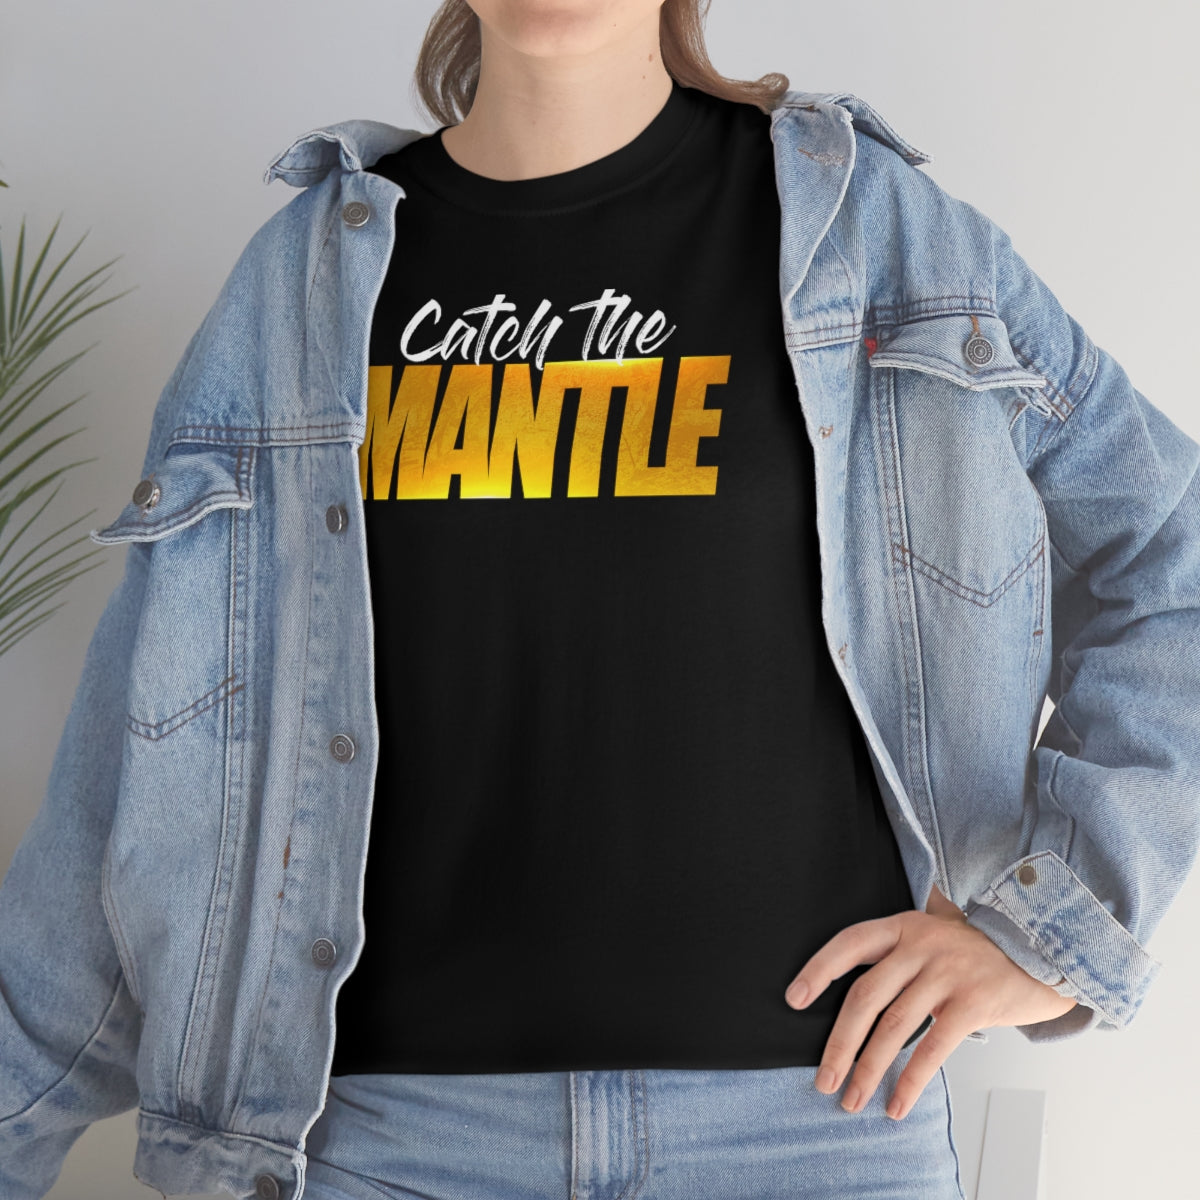 Catch the Mantle Shirt